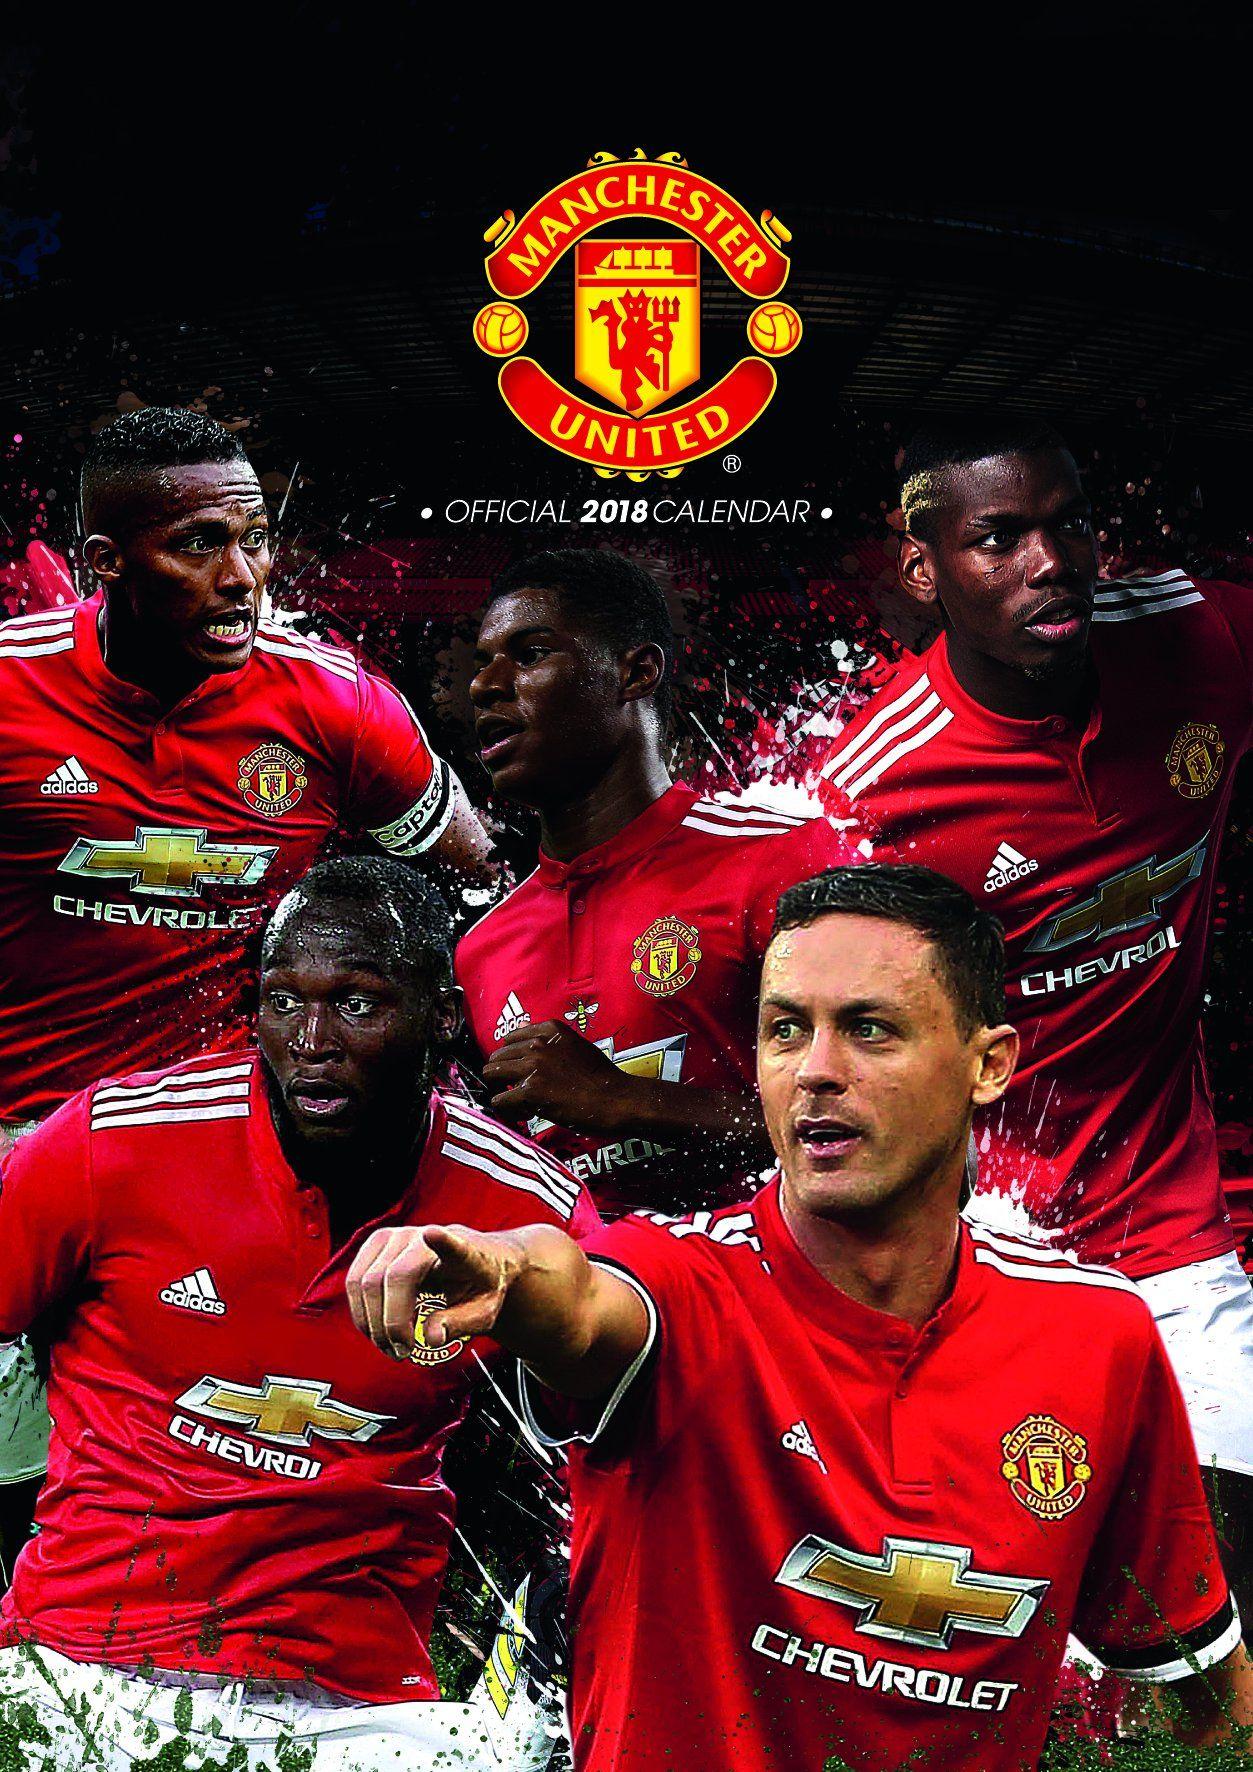 Manchester United F.C. Official 2018 Calendar Poster Format